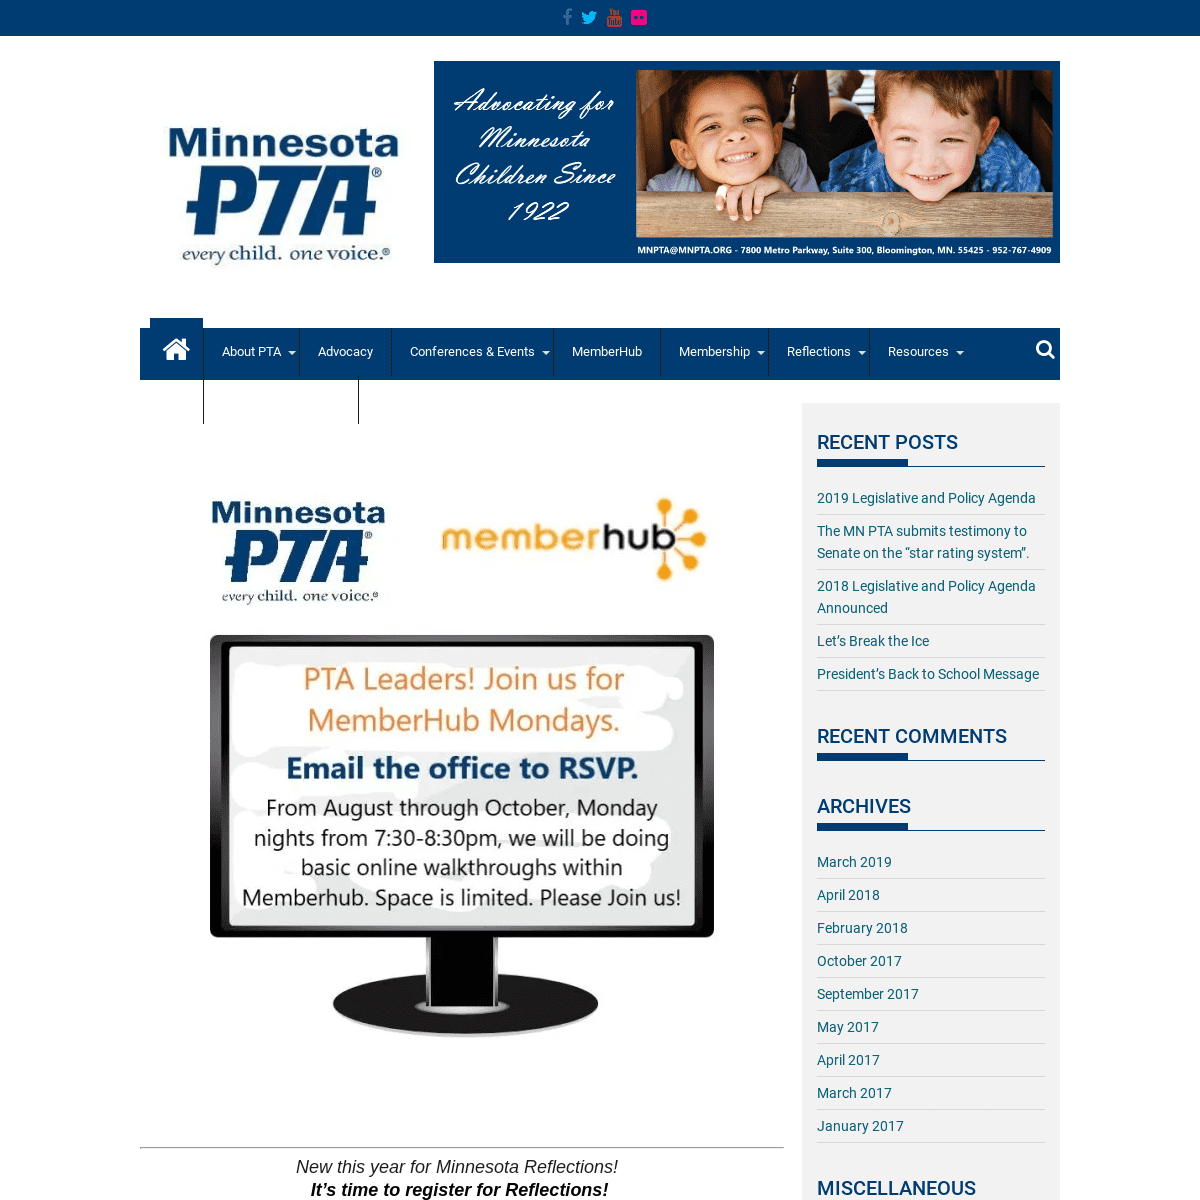 A complete backup of mnpta.org